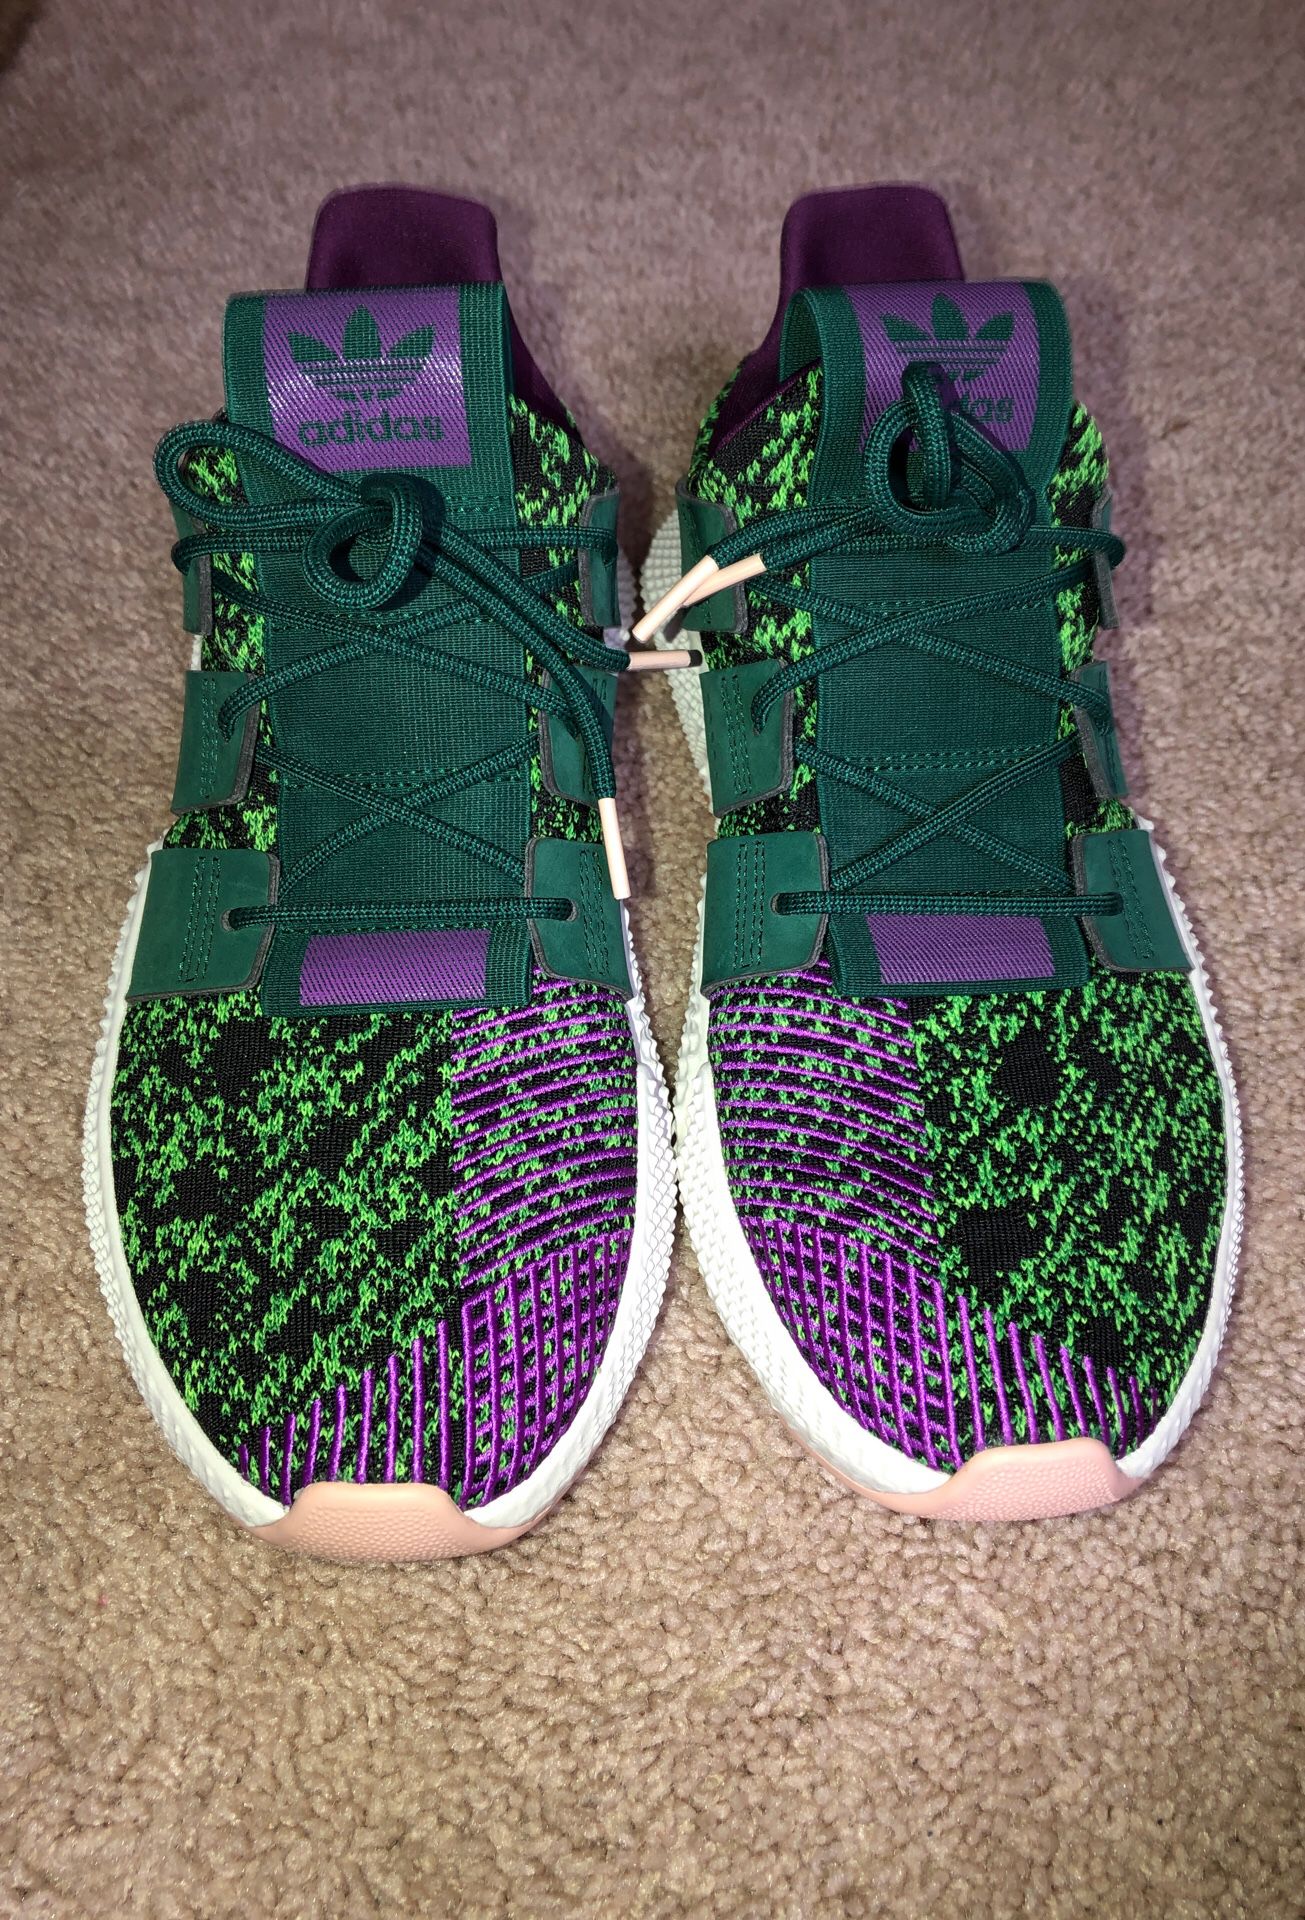 Adidas Prophere “Cell” DragonBall Z Collection size 9